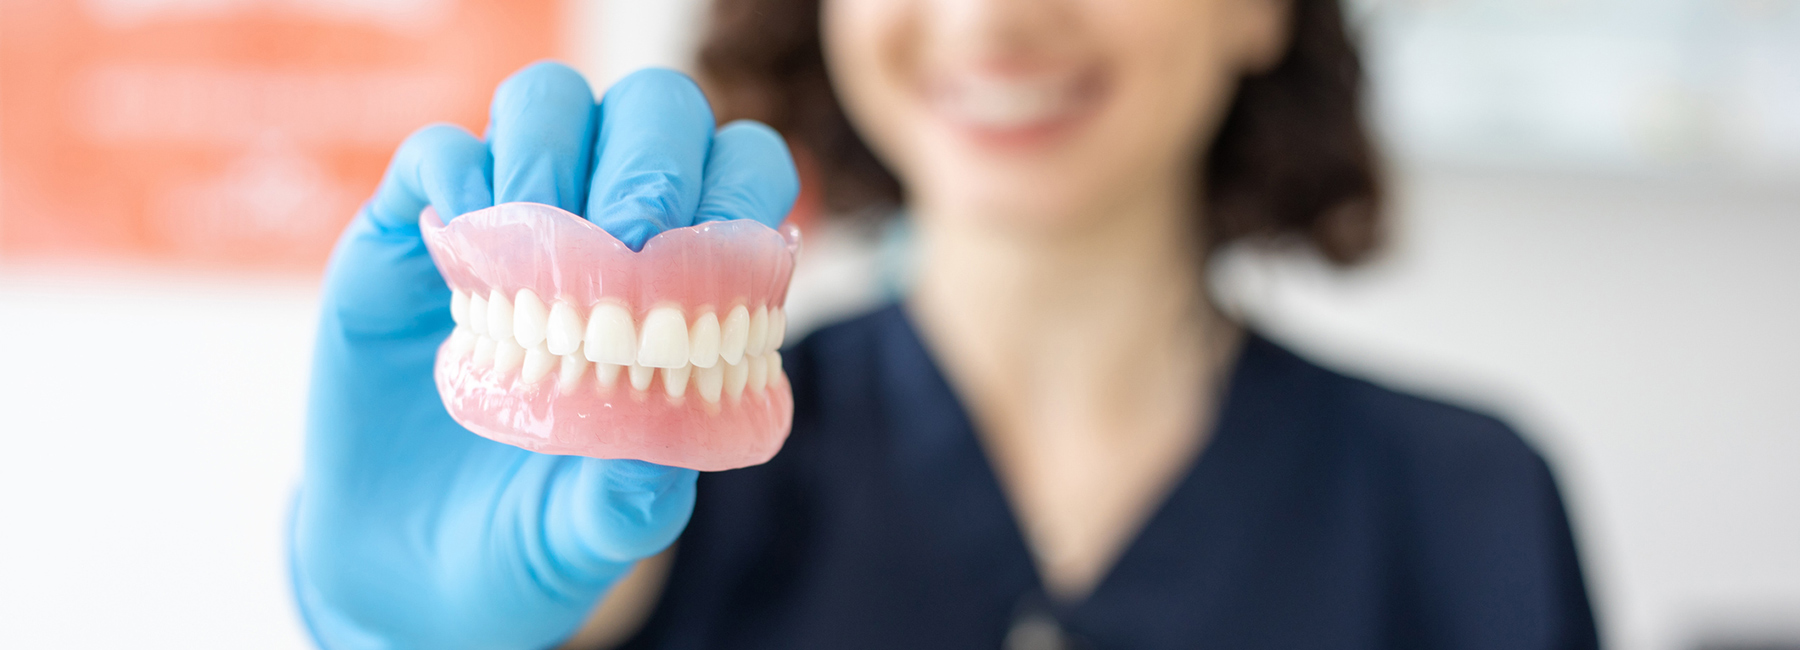 We provide denture services and treatments at our Waterdown dental clinic.